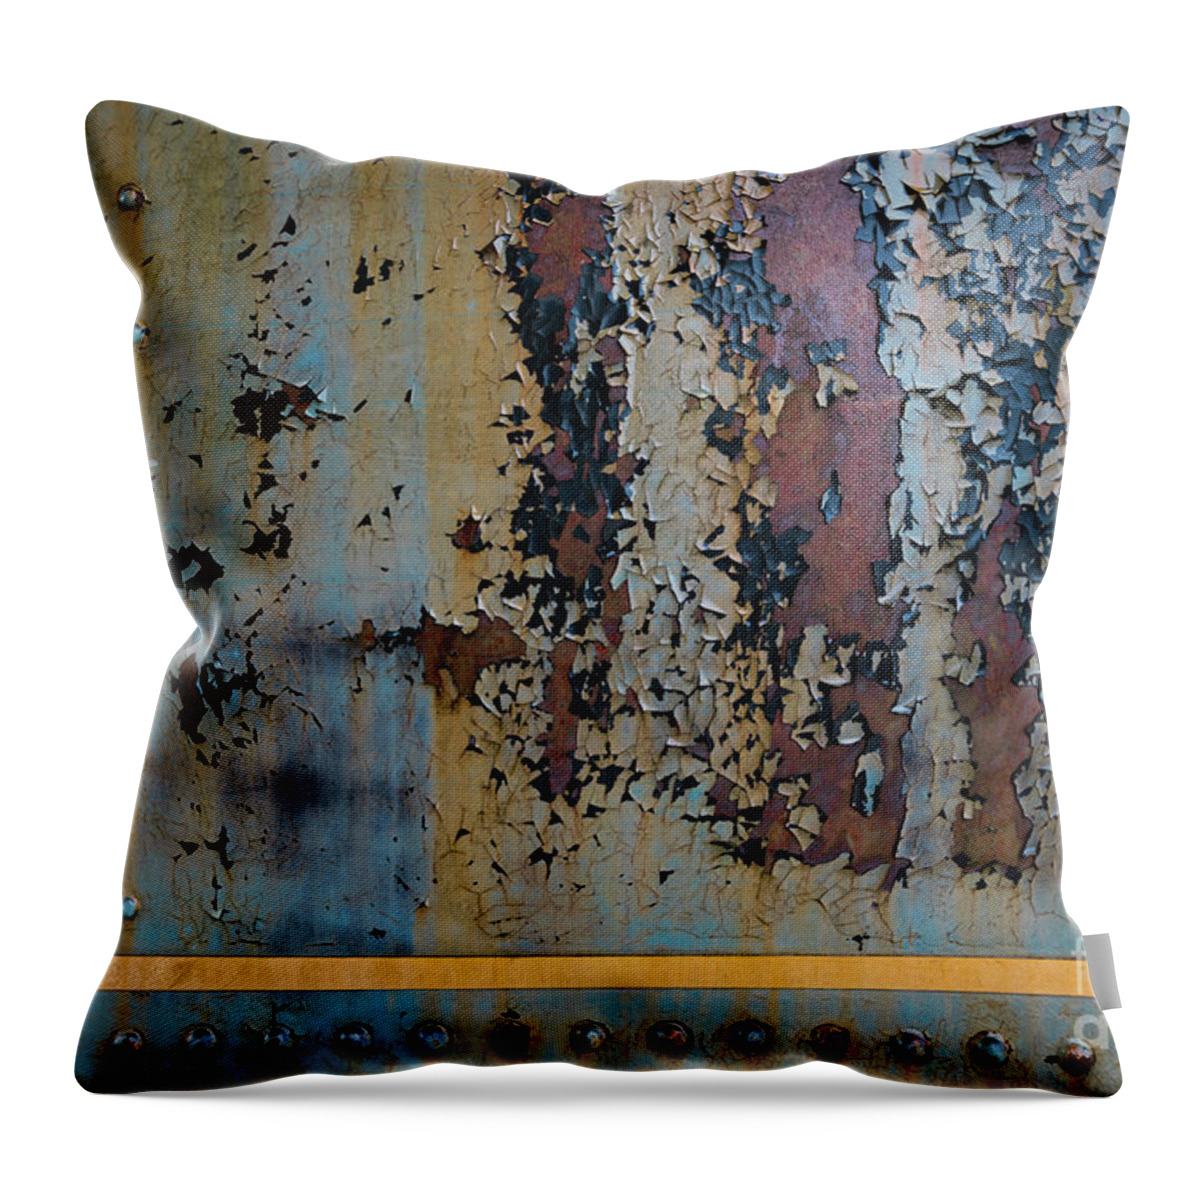 Railcar Throw Pillow featuring the photograph Railcar Abstract by Doug Sturgess